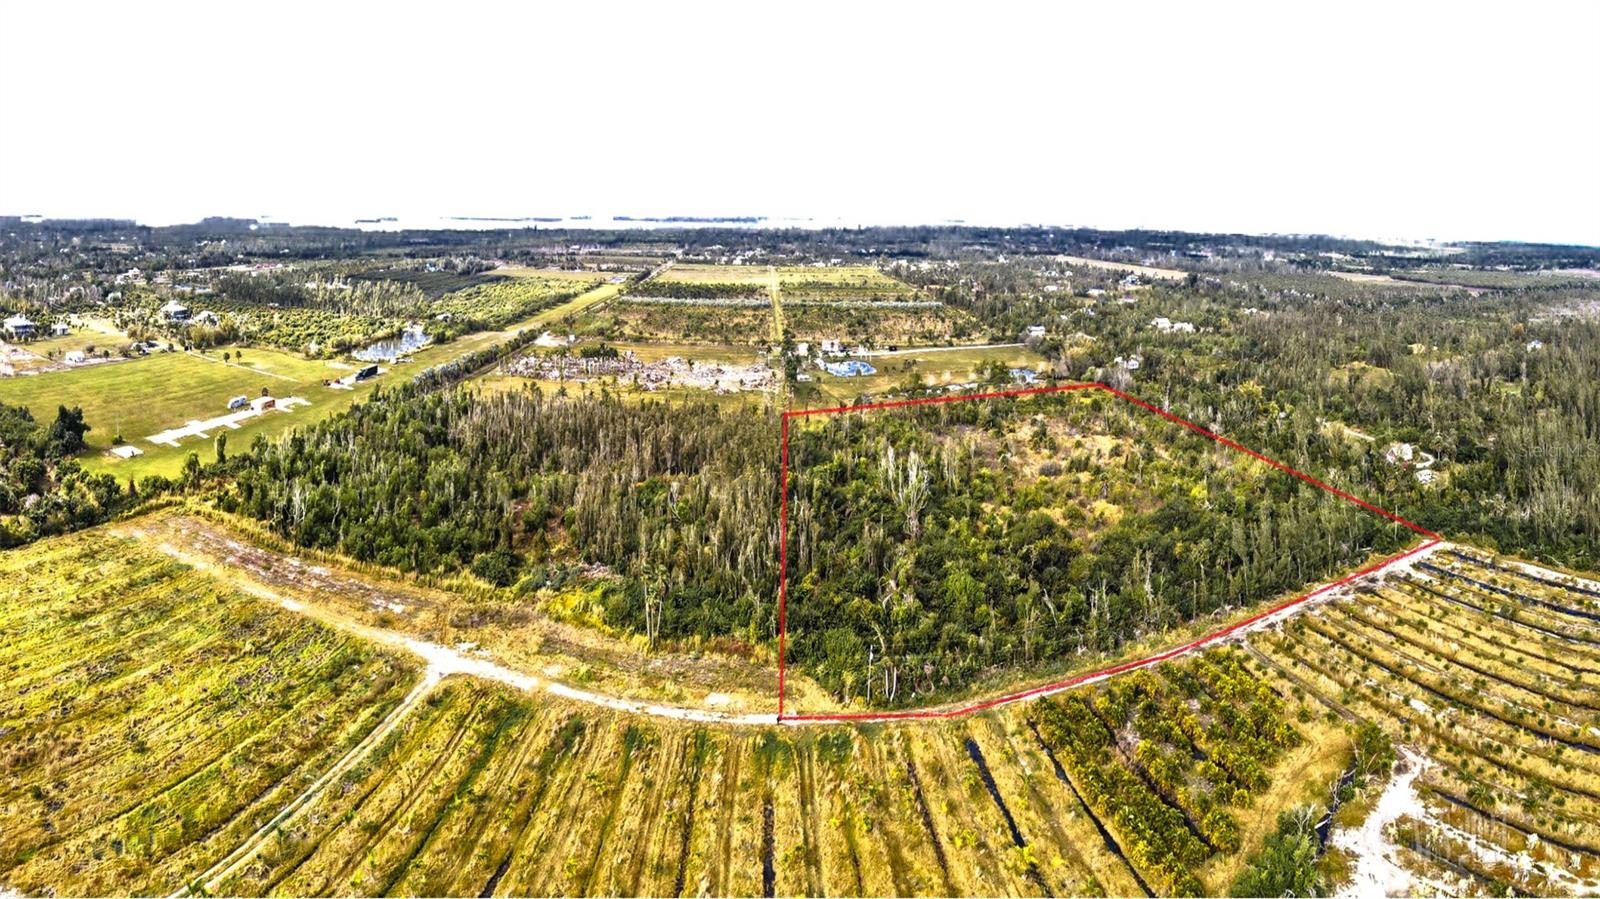 Listing Details for Access Undetermined, BOKEELIA, FL 33922